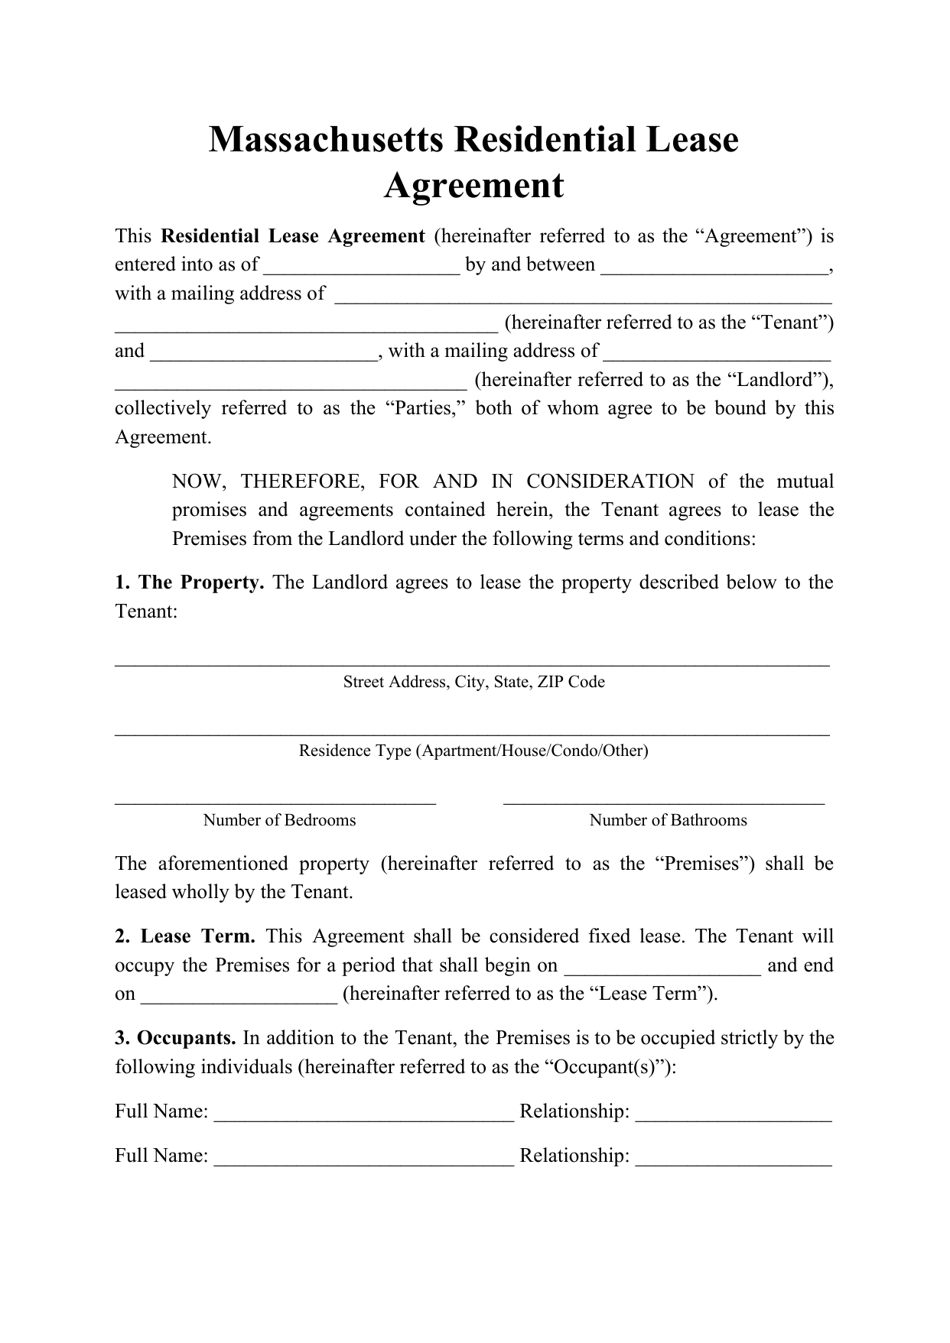 Residential Lease Agreement Template - Massachusetts, Page 1